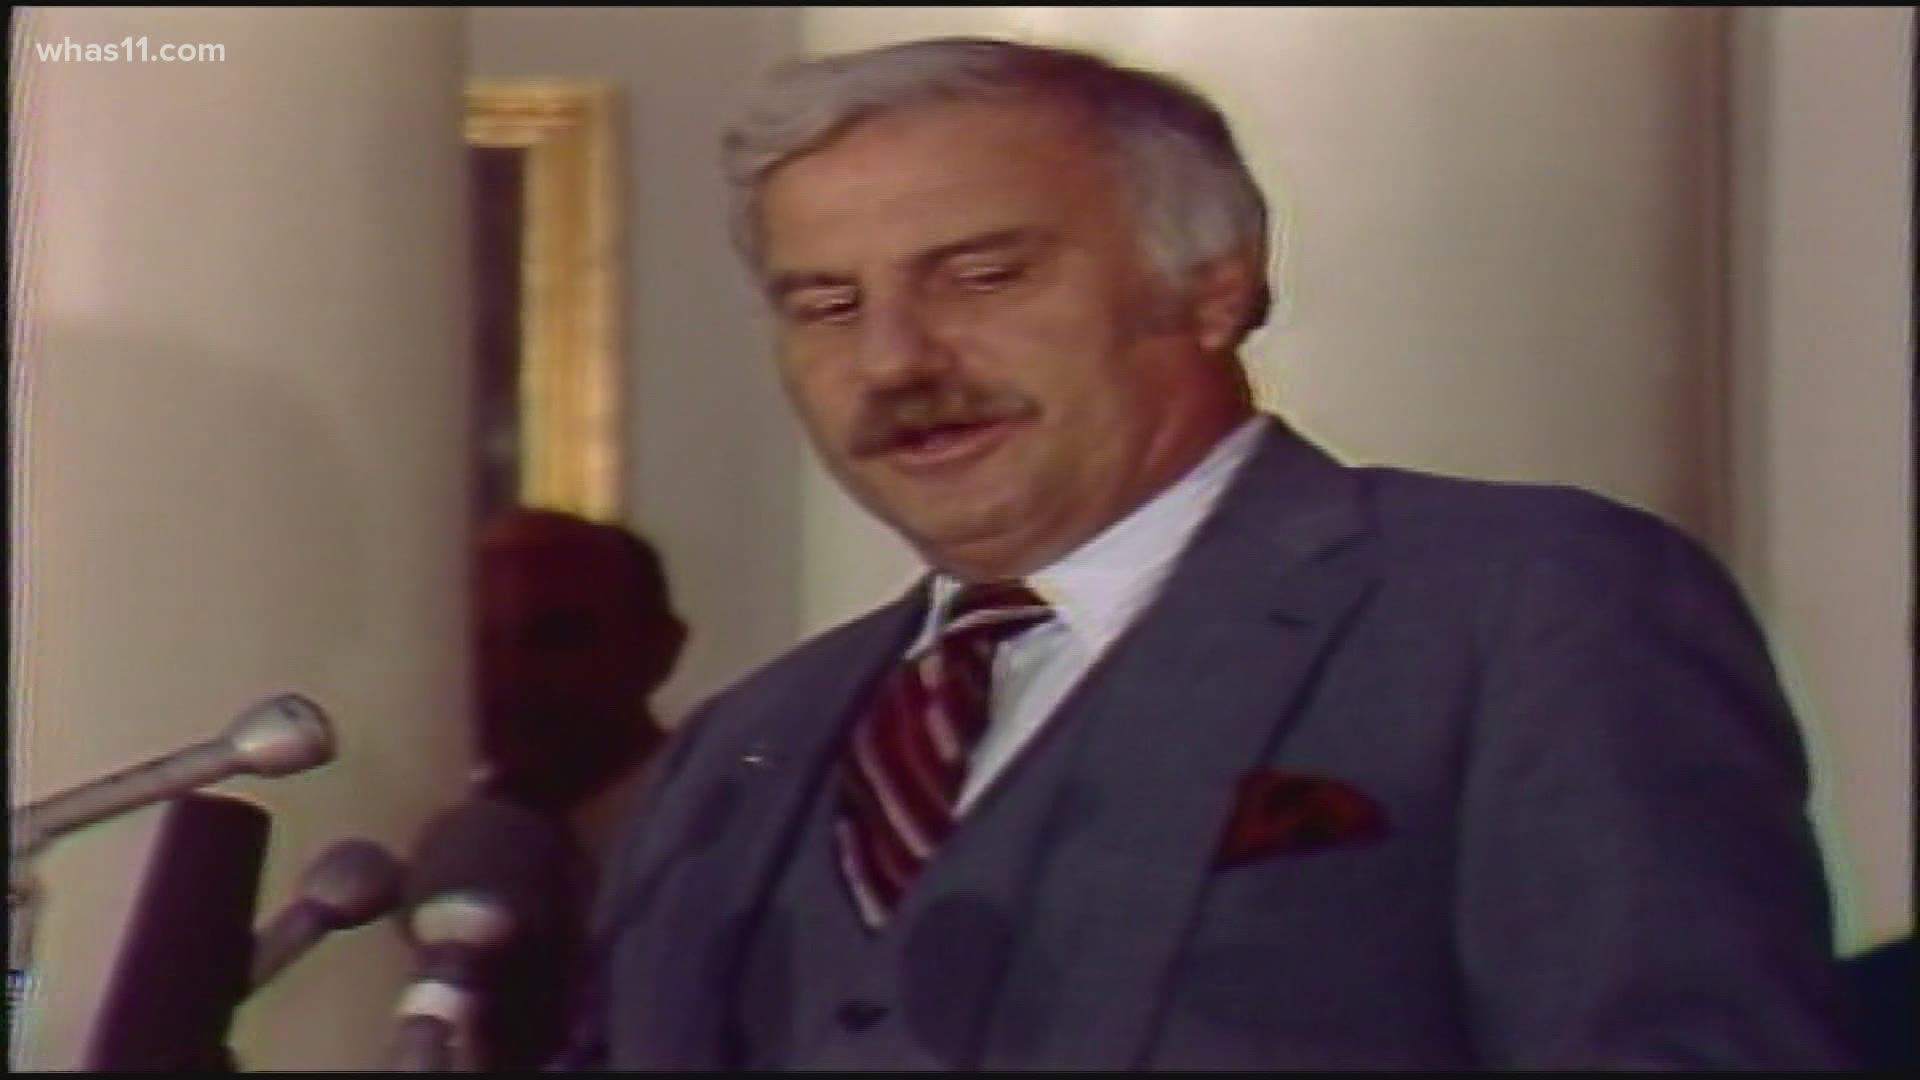 WHAS11 sports director Kent Spencer takes a look back at the impact the football coaching legend had on college football.